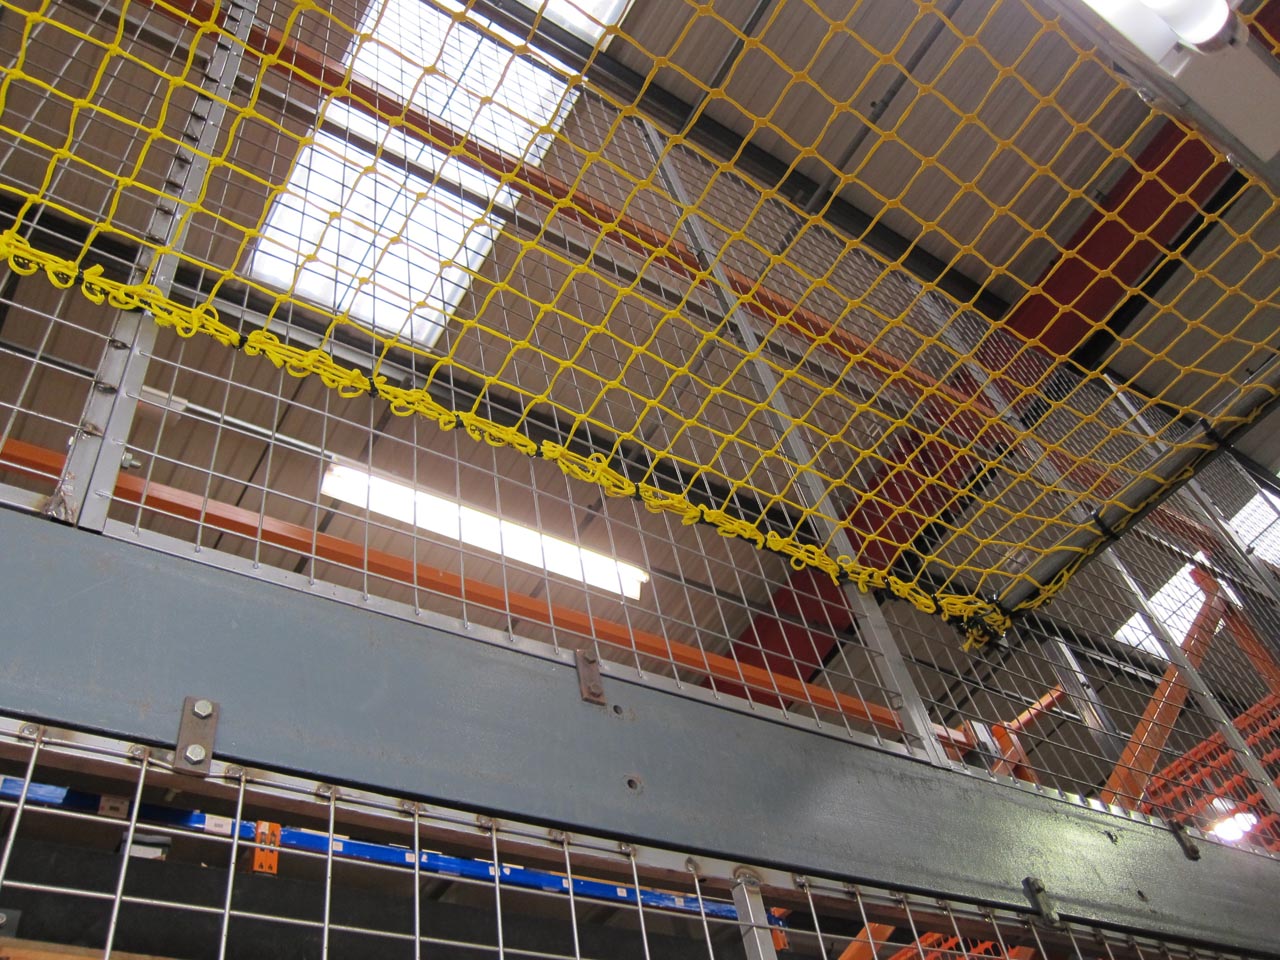 Overhead yellow knotted netting in a warehouse.